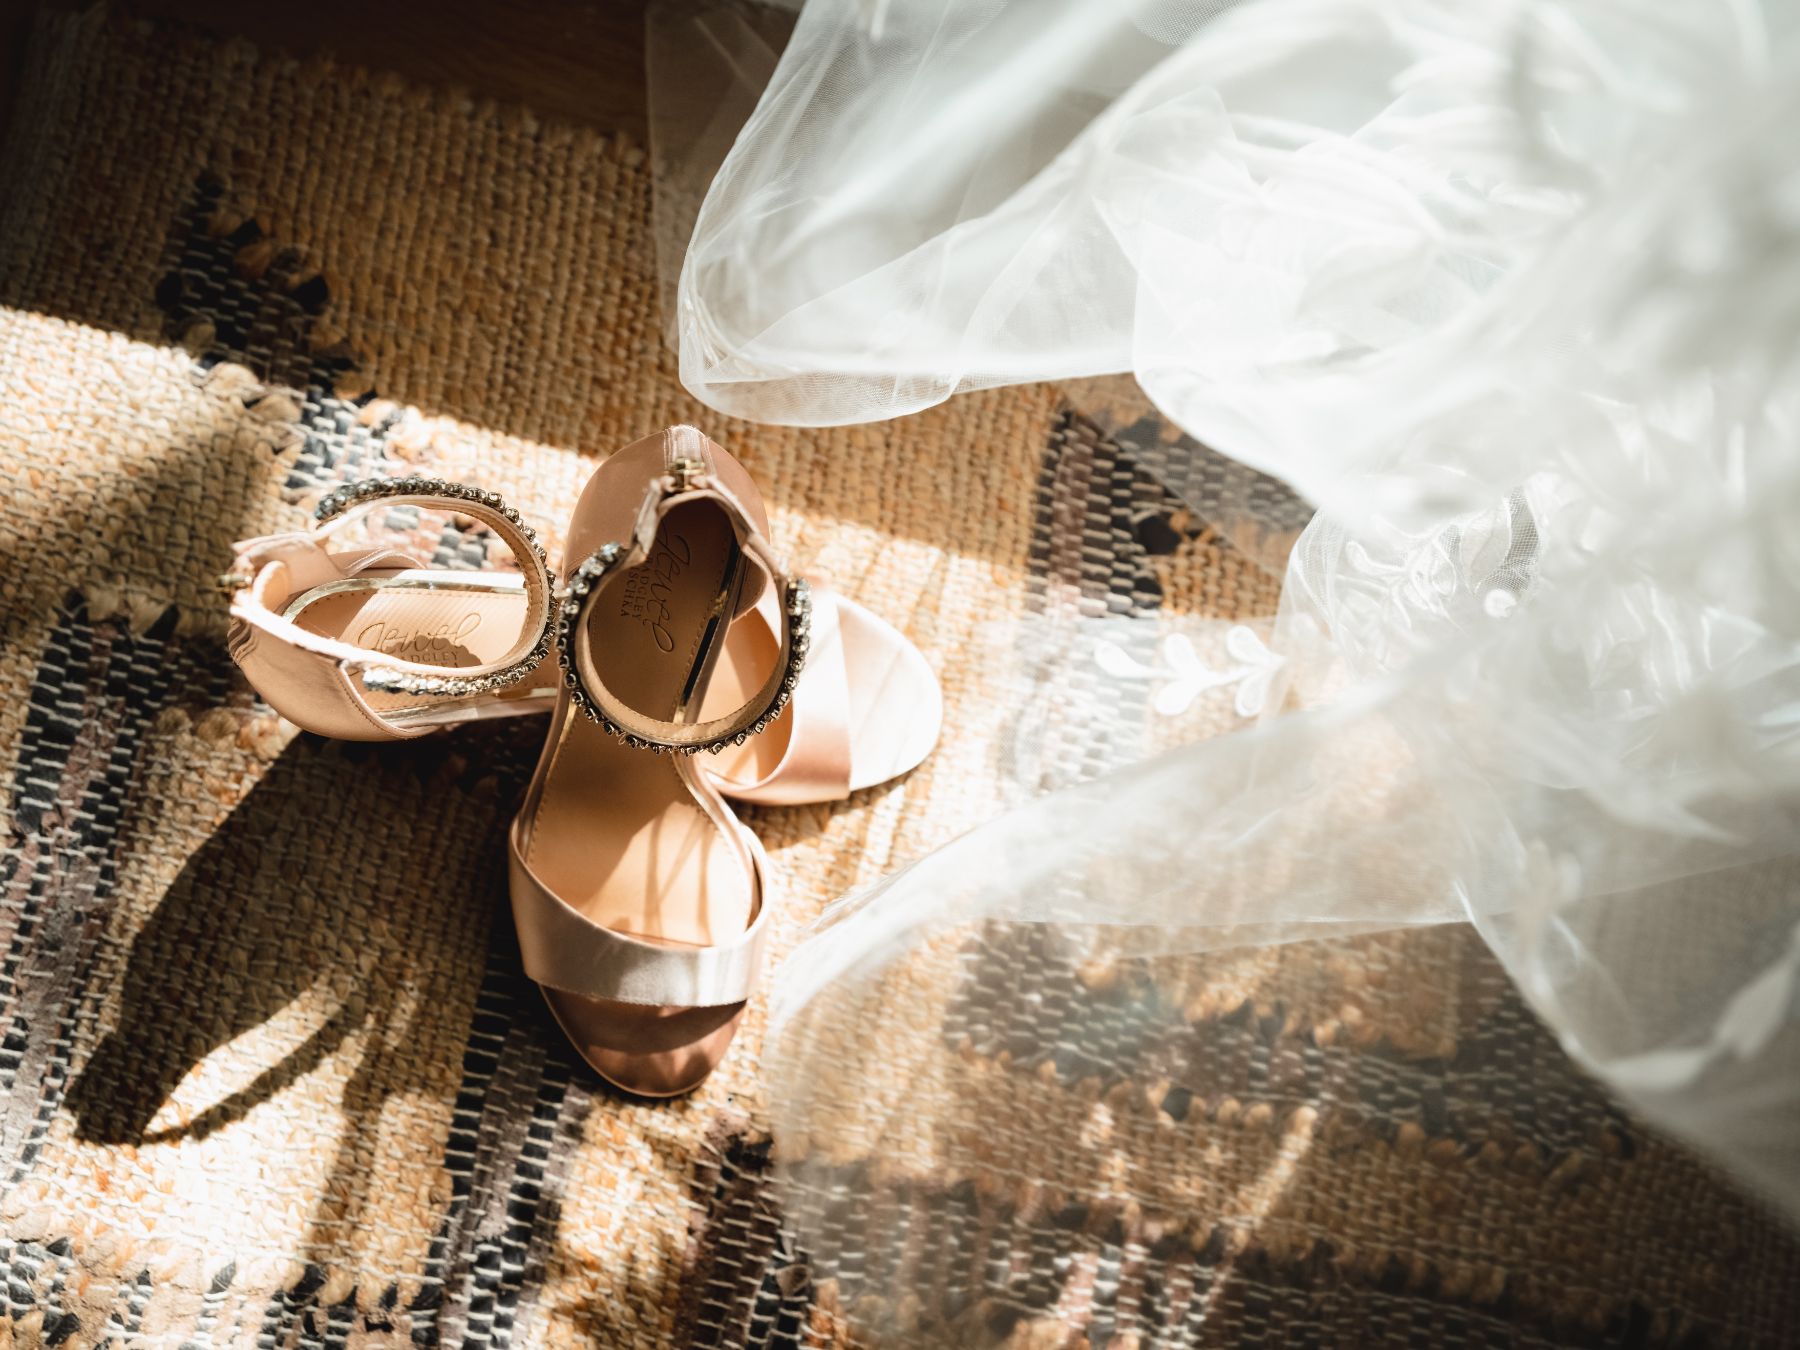 Shoes laid out with a wedding veil, a top of a rustic rug.